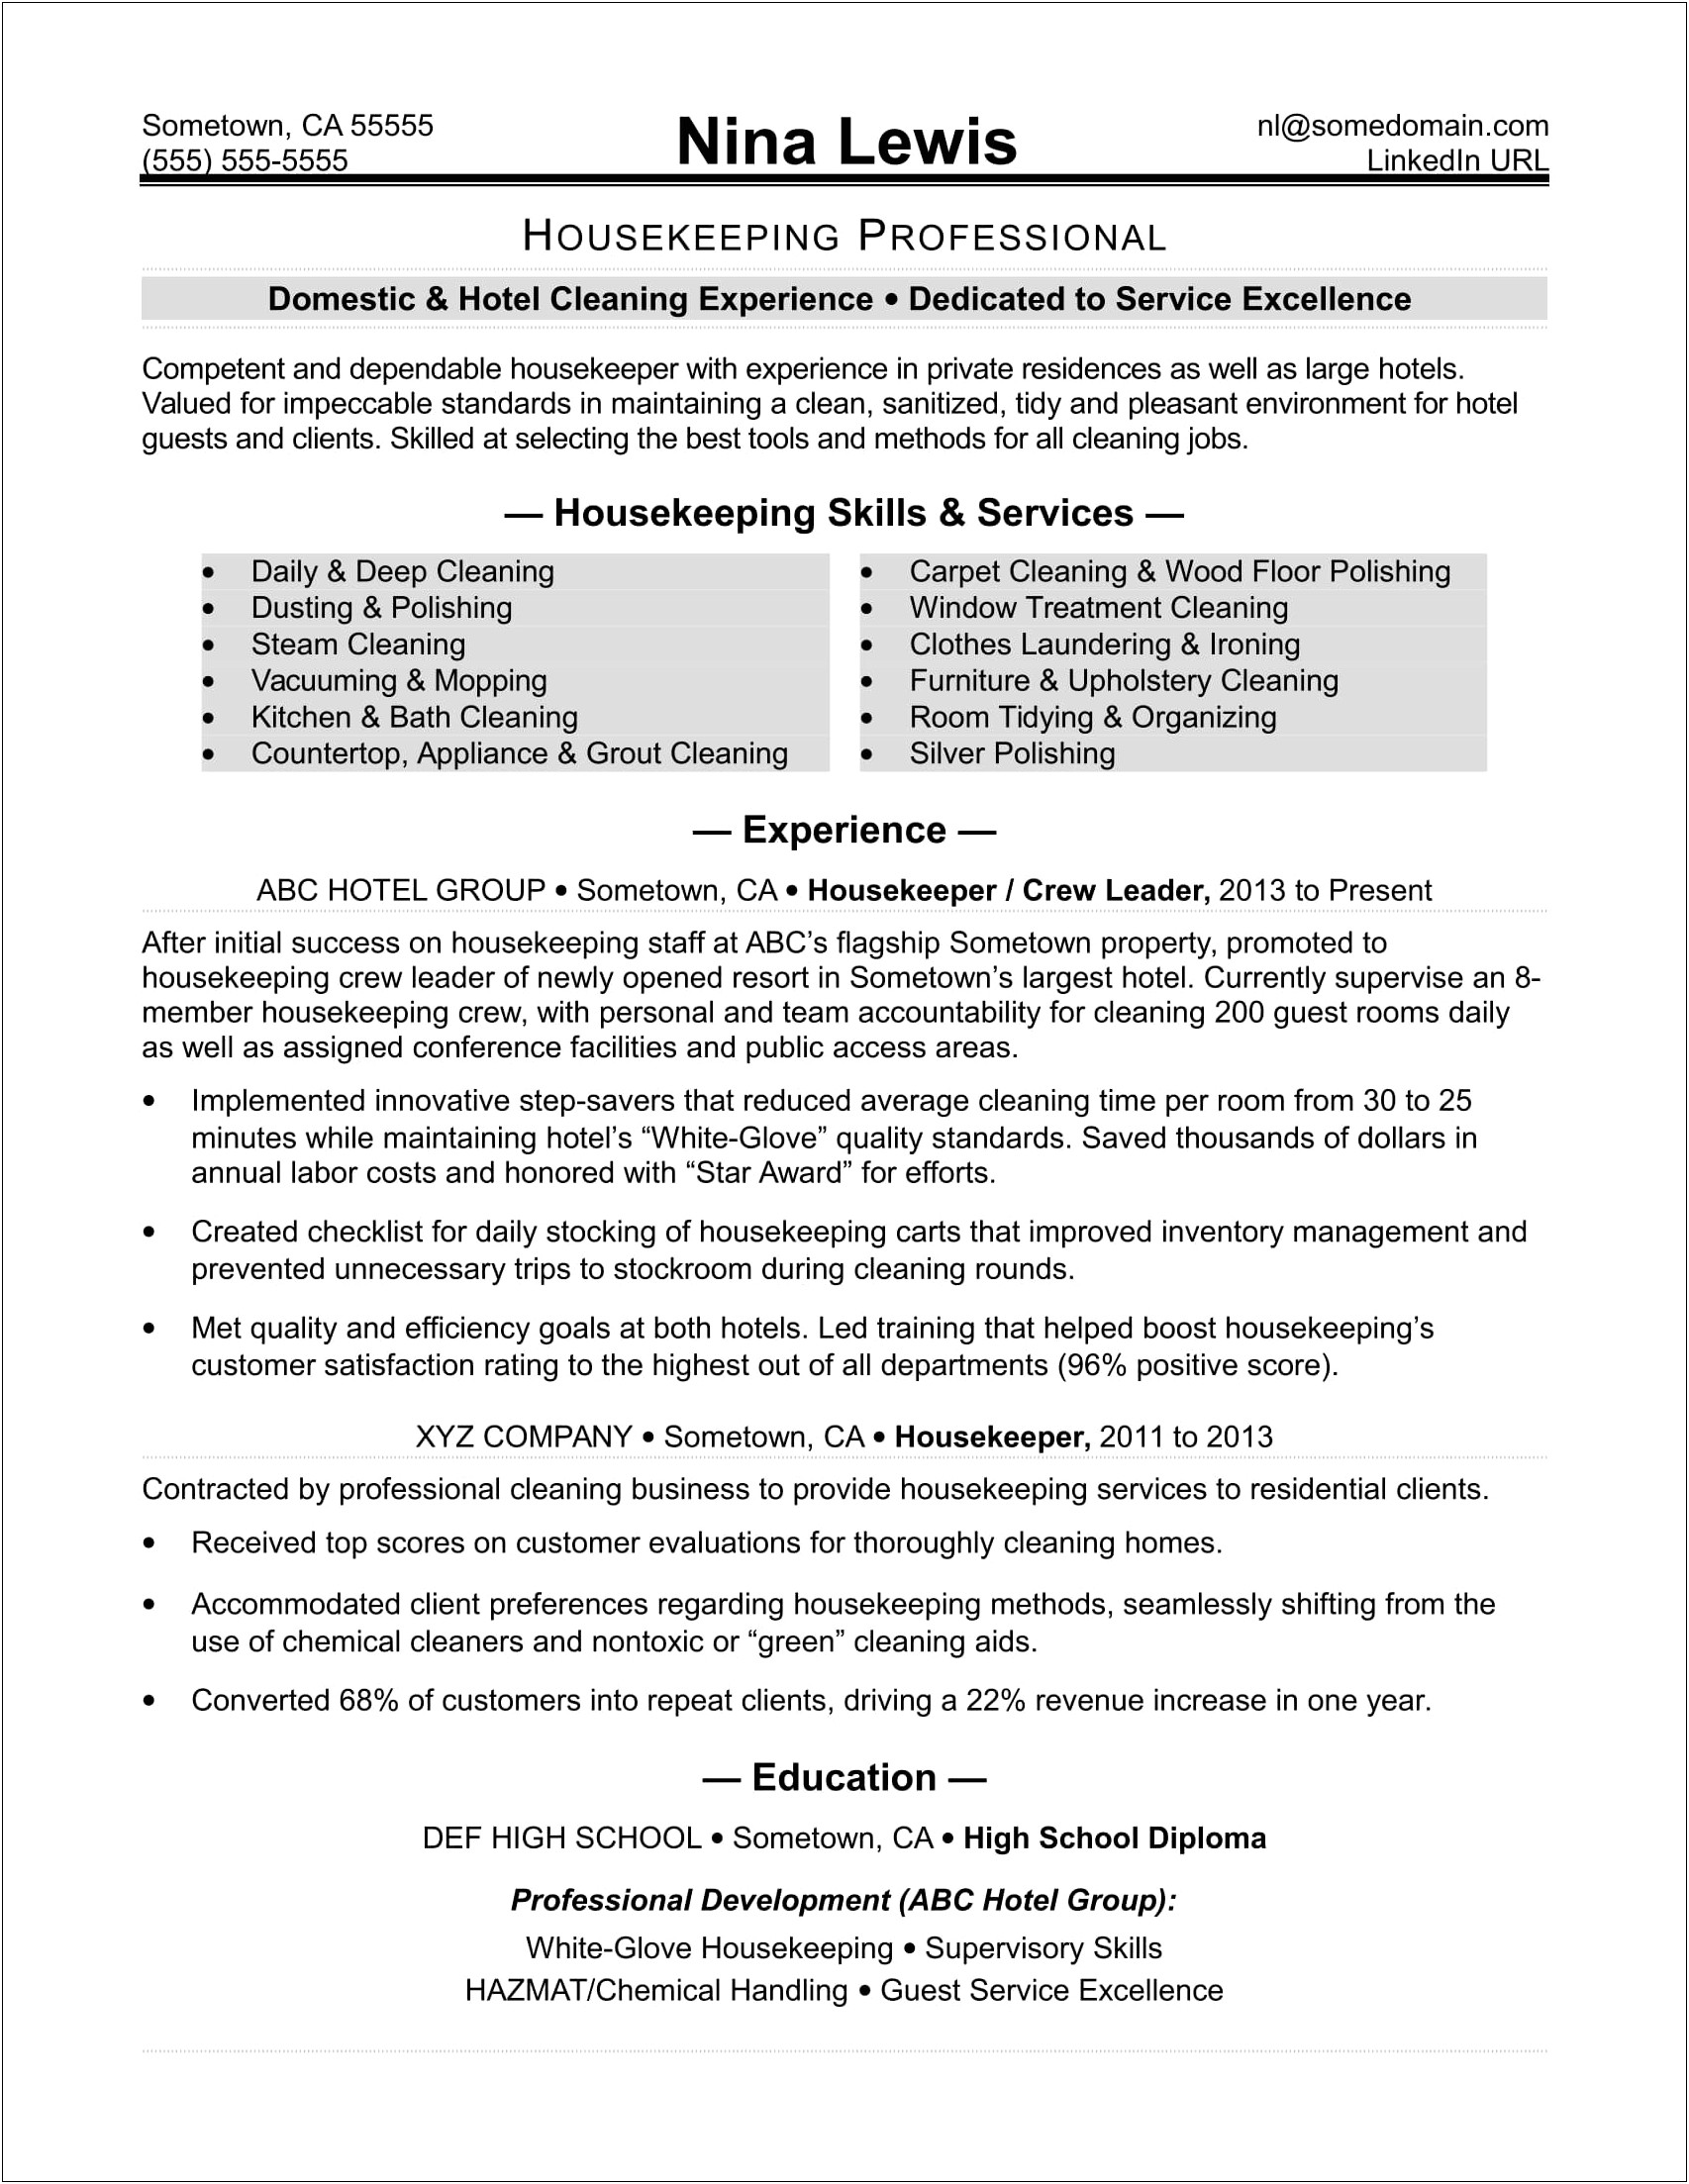 Sample Resume Objective For Janitorial Position